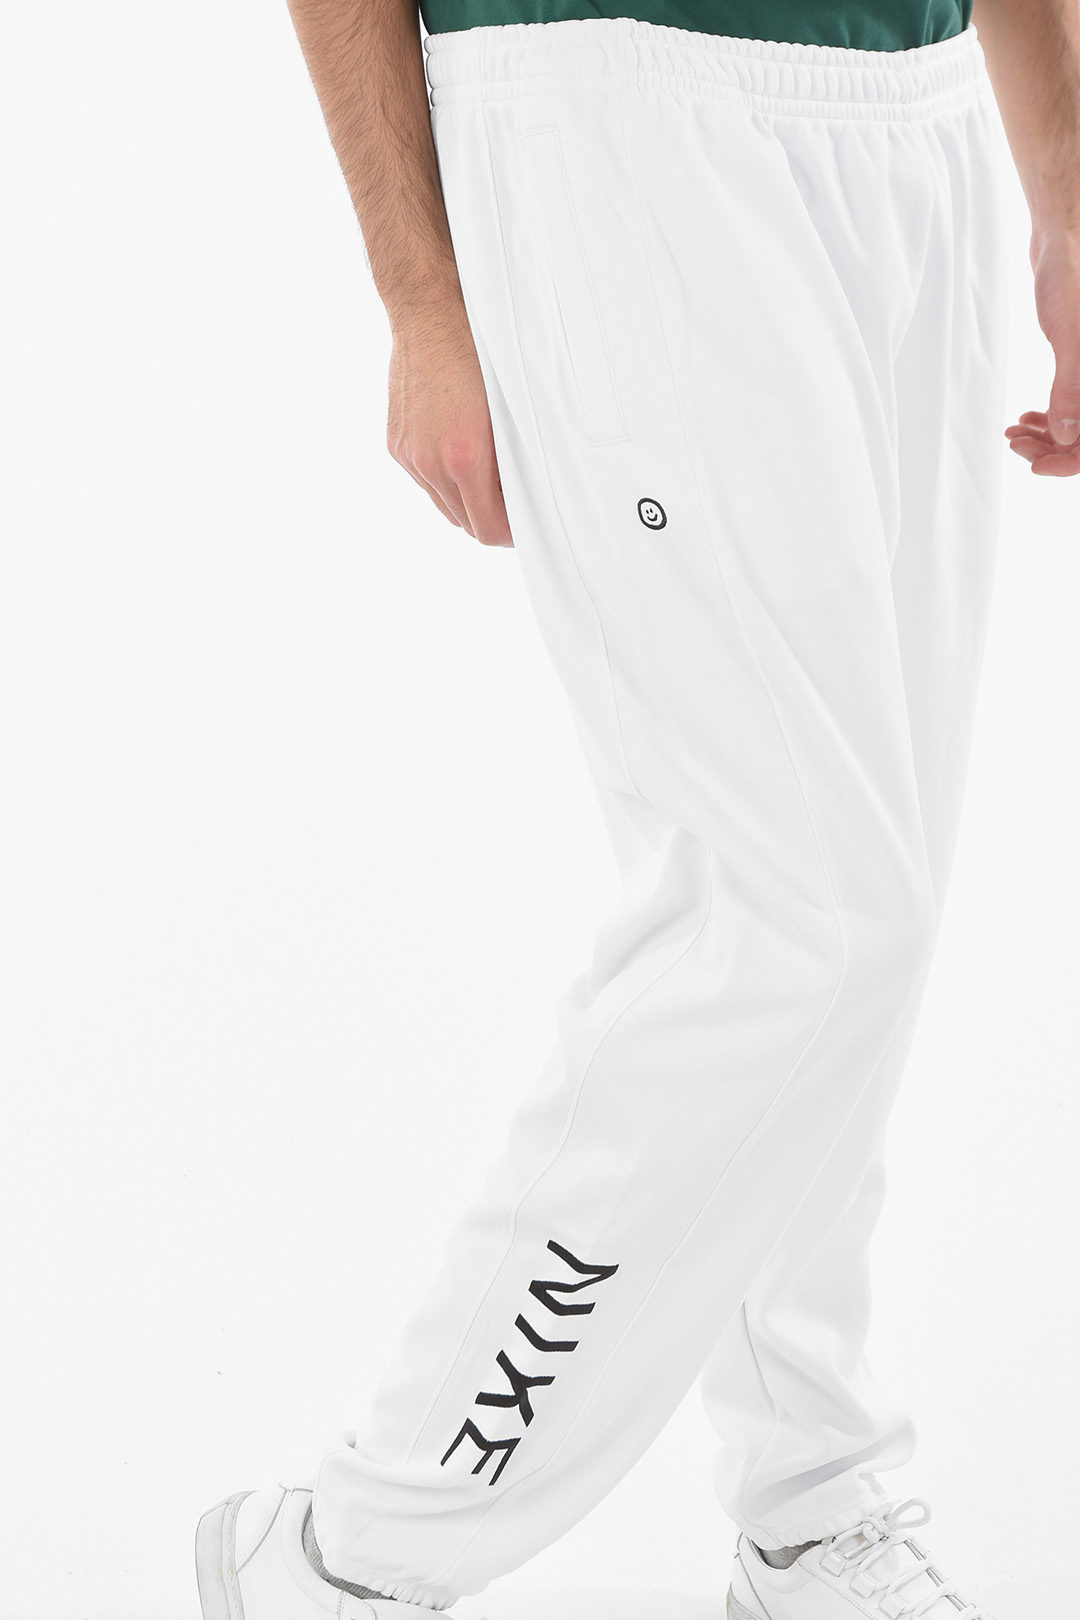 Nike Logo Embroidered Solid Color Joggers men - Glamood